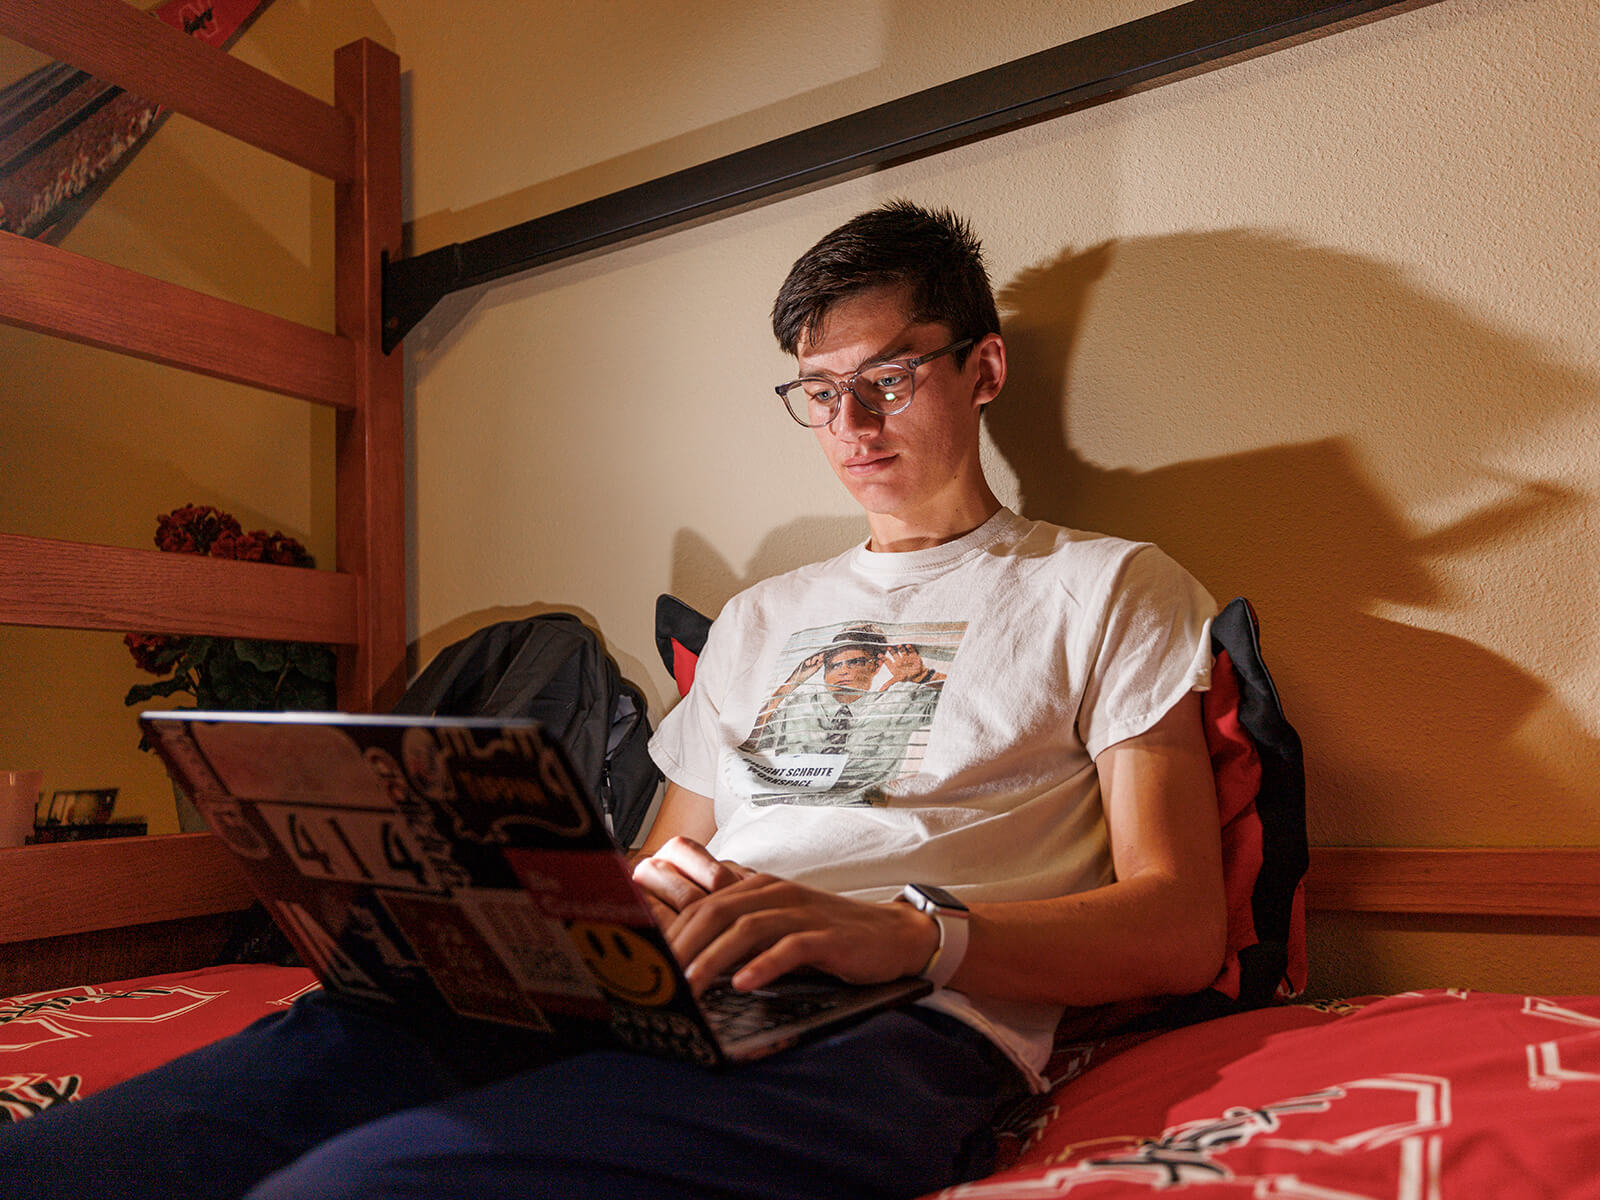 Student sitting on bed in room looking at laptop